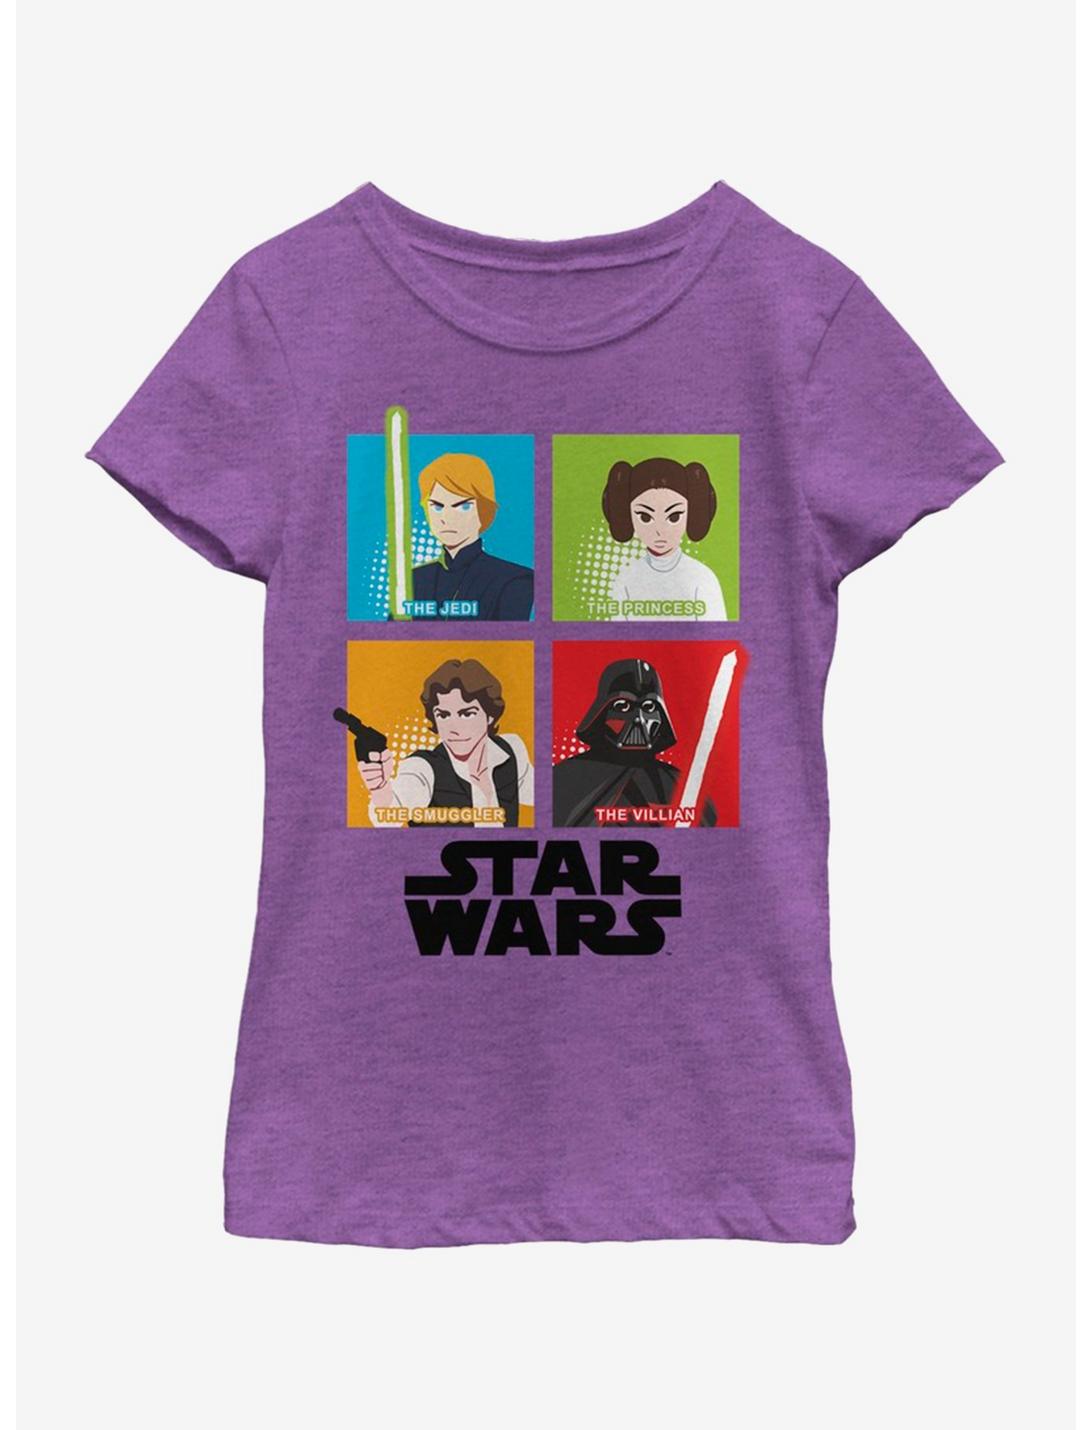 Star Wars Galaxy Adventures Four Square Youth Girls T-Shirt, PURPLE BERRY, hi-res